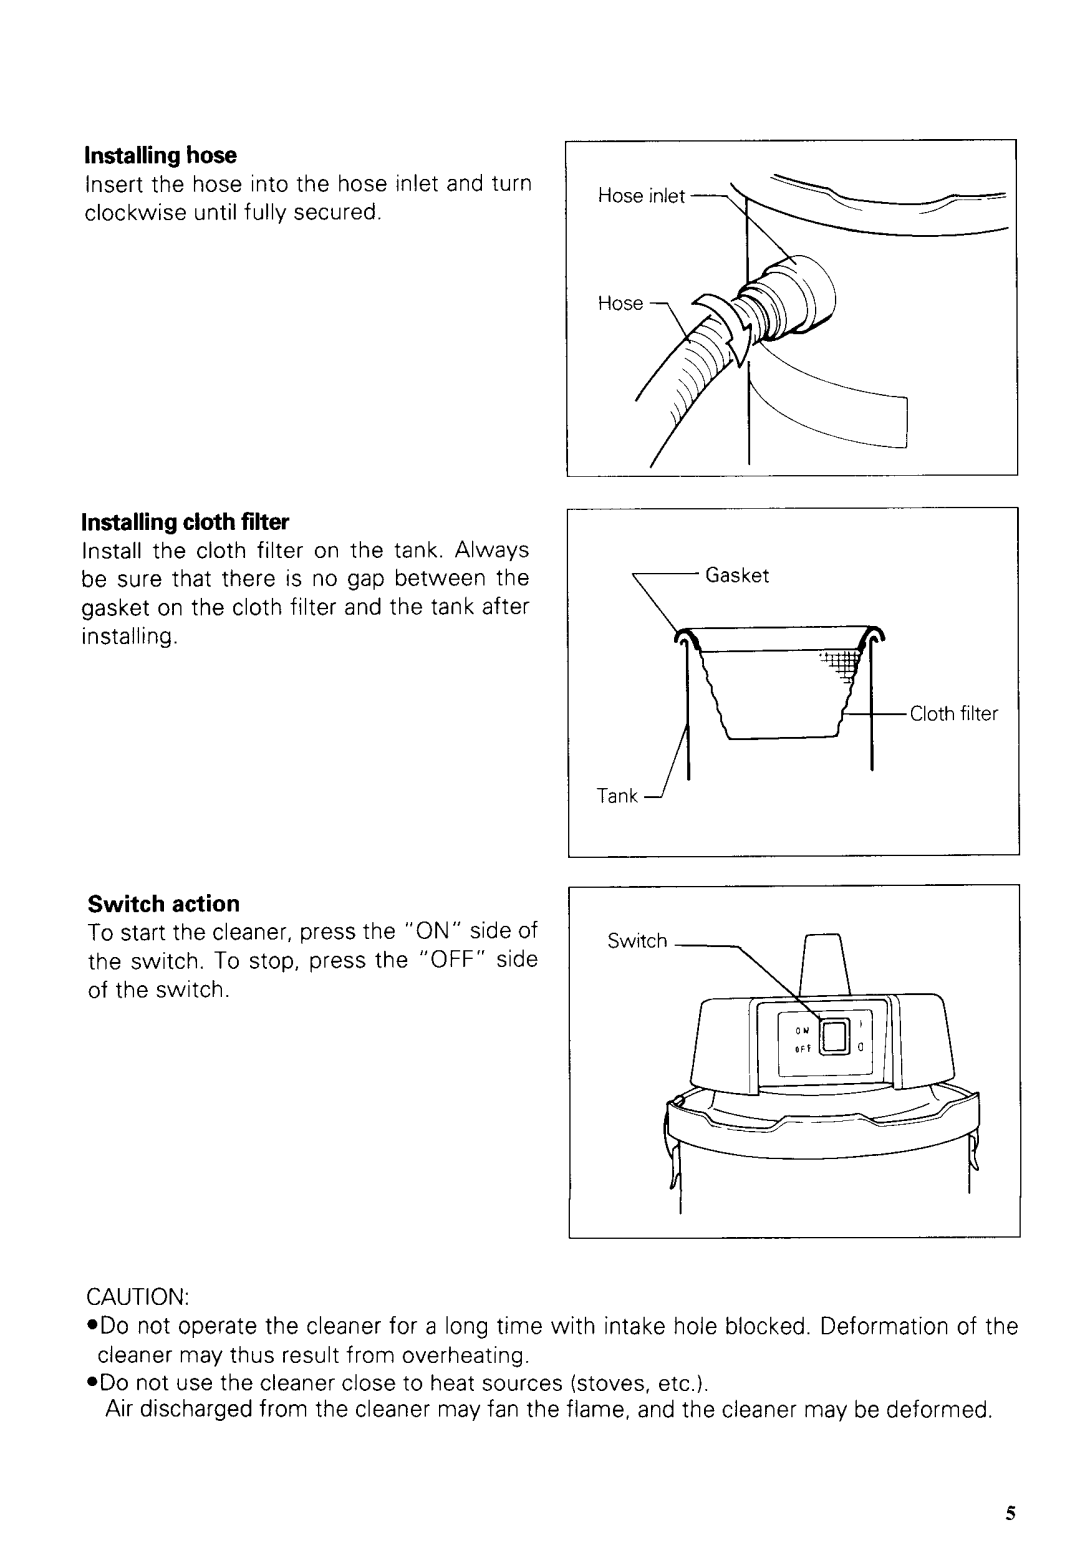 Makita 406 instruction manual Installing hose, Installingcloth filter, Switch action, Tank Switch 